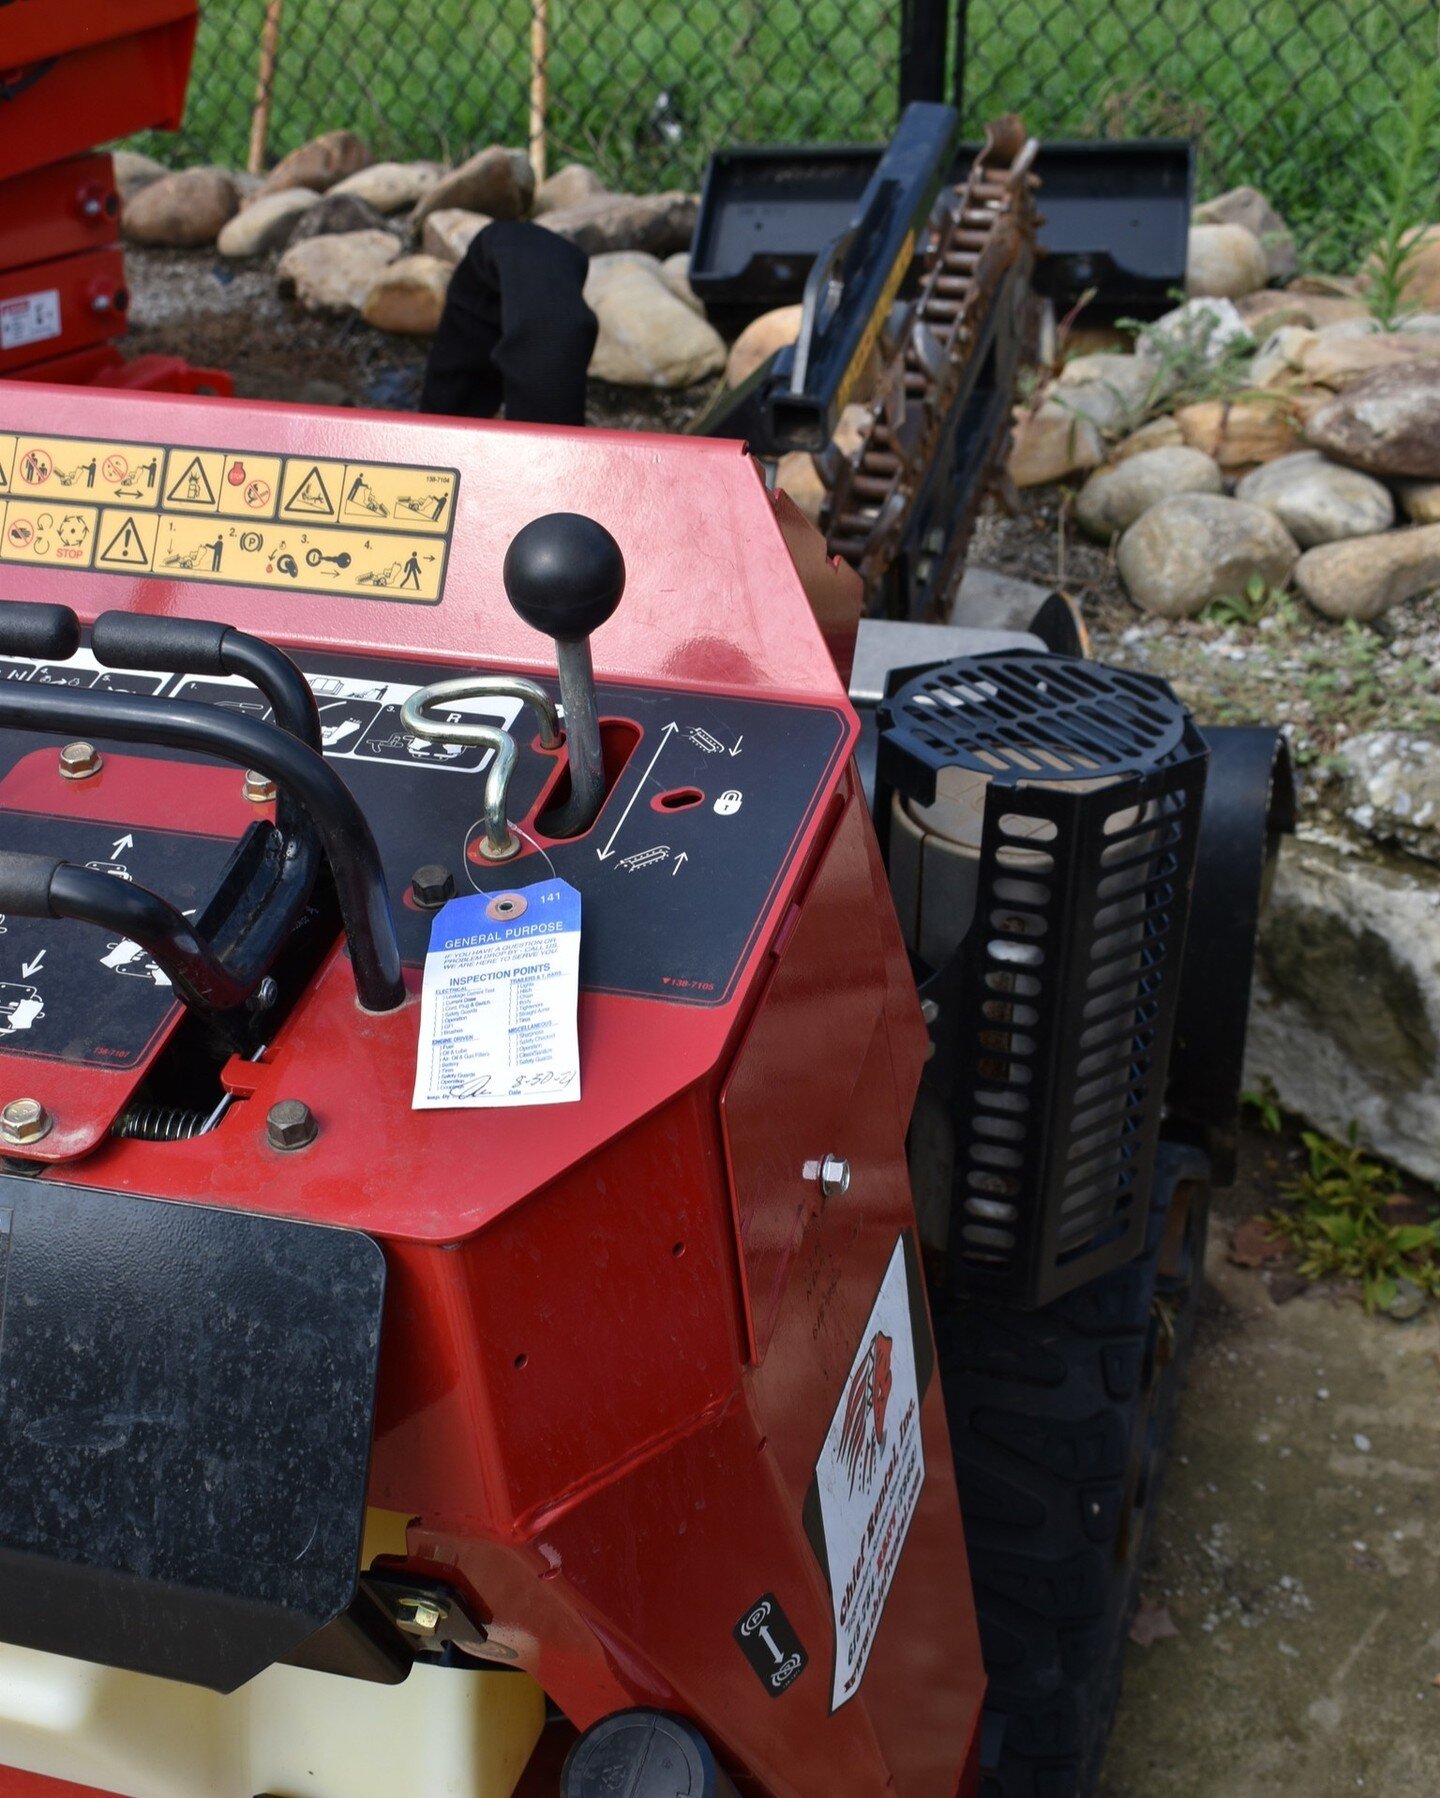 When you need to add a line for a pool or maybe there's an issue with the main water lines, you may need a trencher. Rent one with Chief Rental at www.chiefrental.com.
👇
#chiefrental #equipmentrentals #nashvillerentals #trencher #homeprojects #heavy